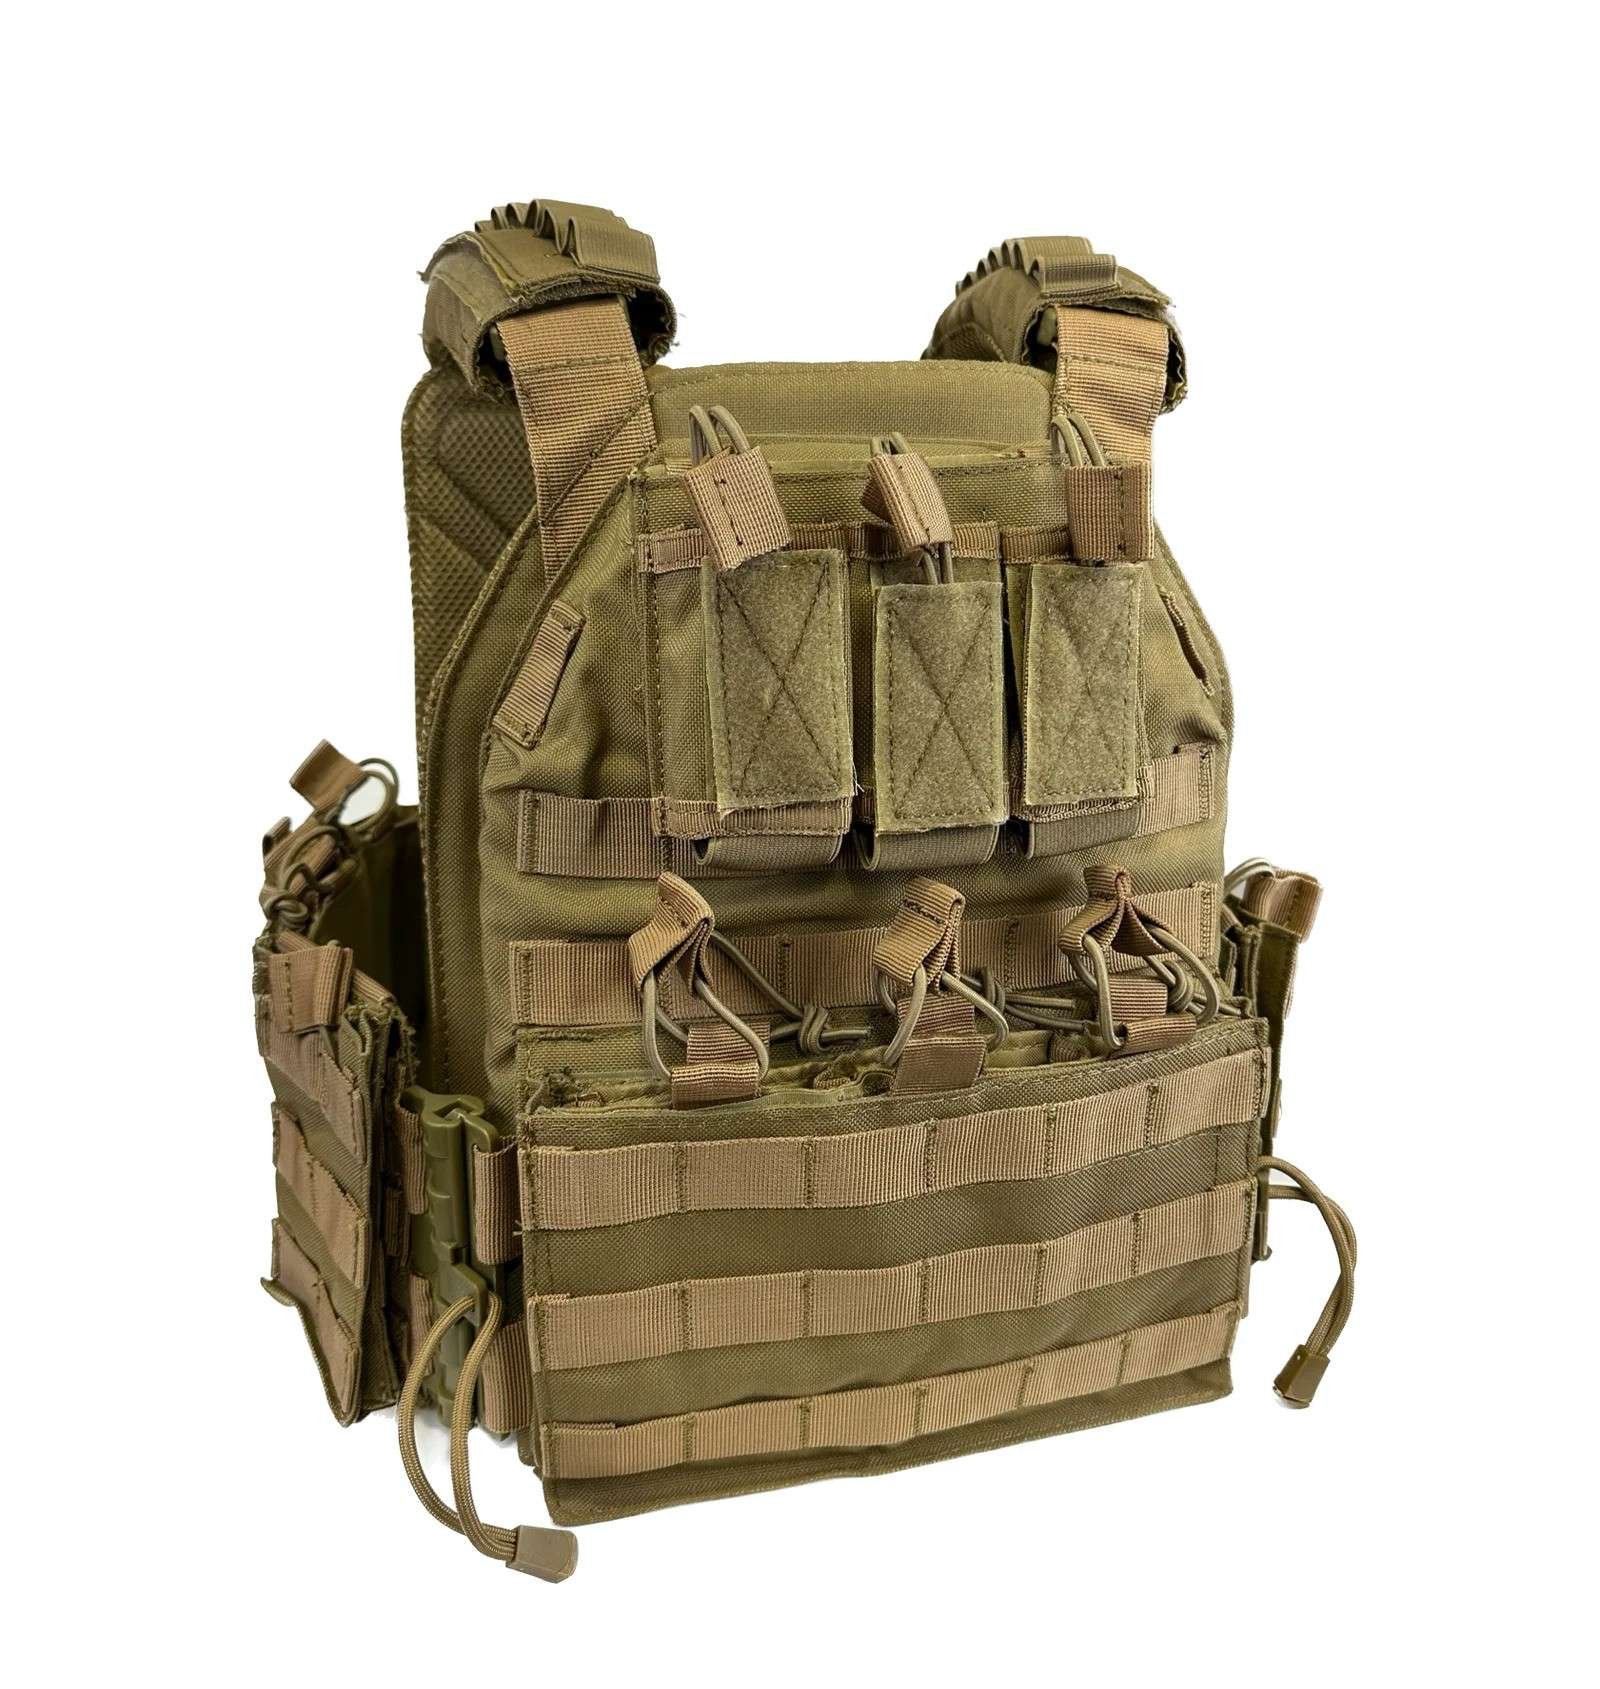 How to set up a Plate Carrier: Step-by-step set up Guide